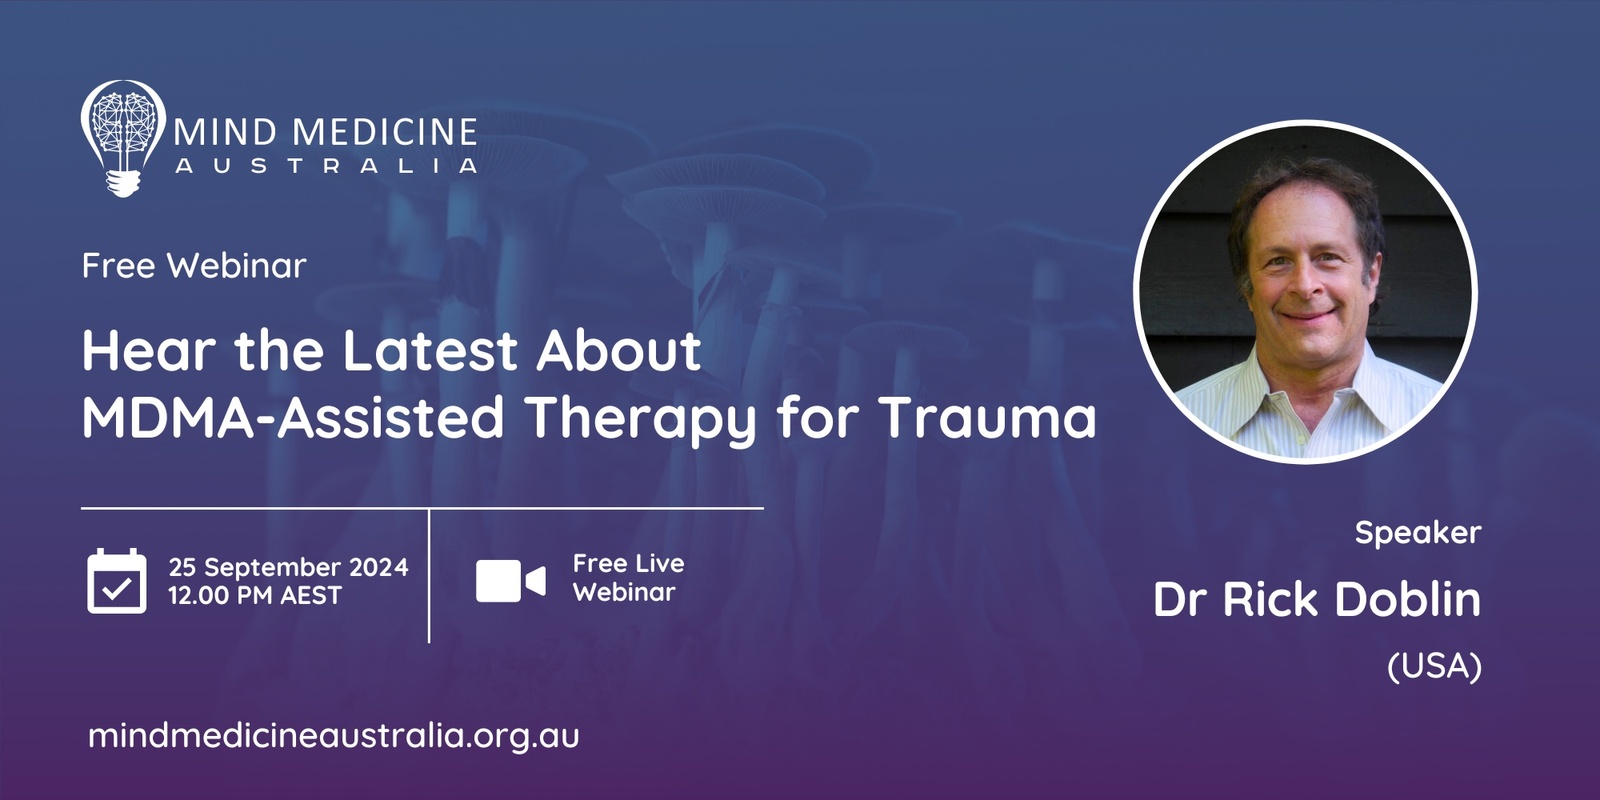 Banner image for Mind Medicine Australia FREE Webinar - Hear the Latest About MDMA-Assisted Therapy for Trauma from Dr Rick Doblin (USA) and MAPS